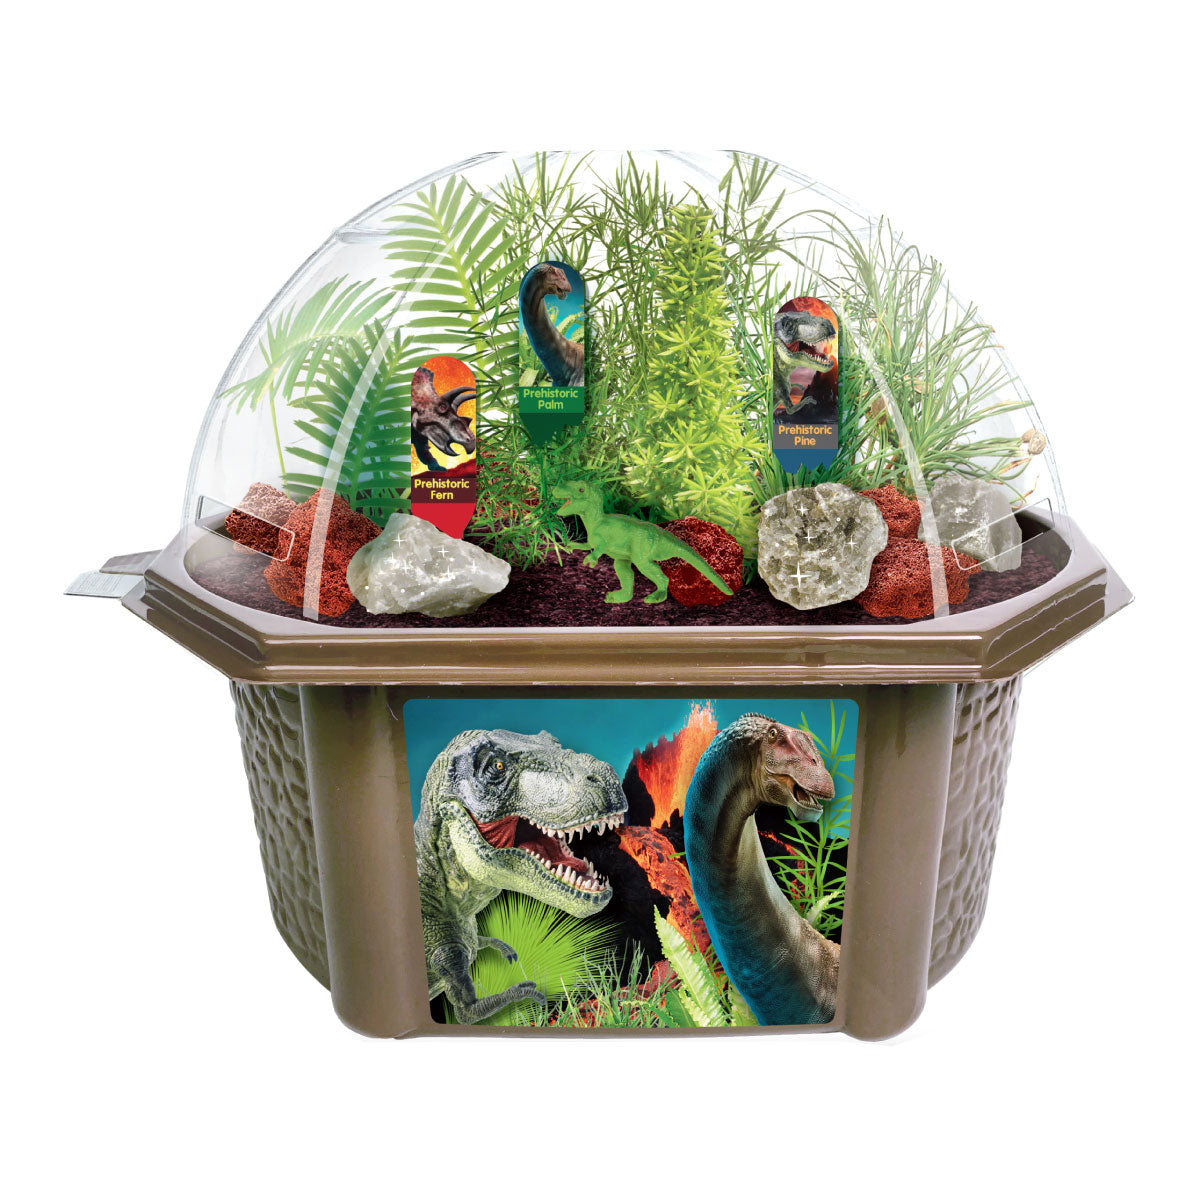 Toys by Nature Dinosaur Biosphere